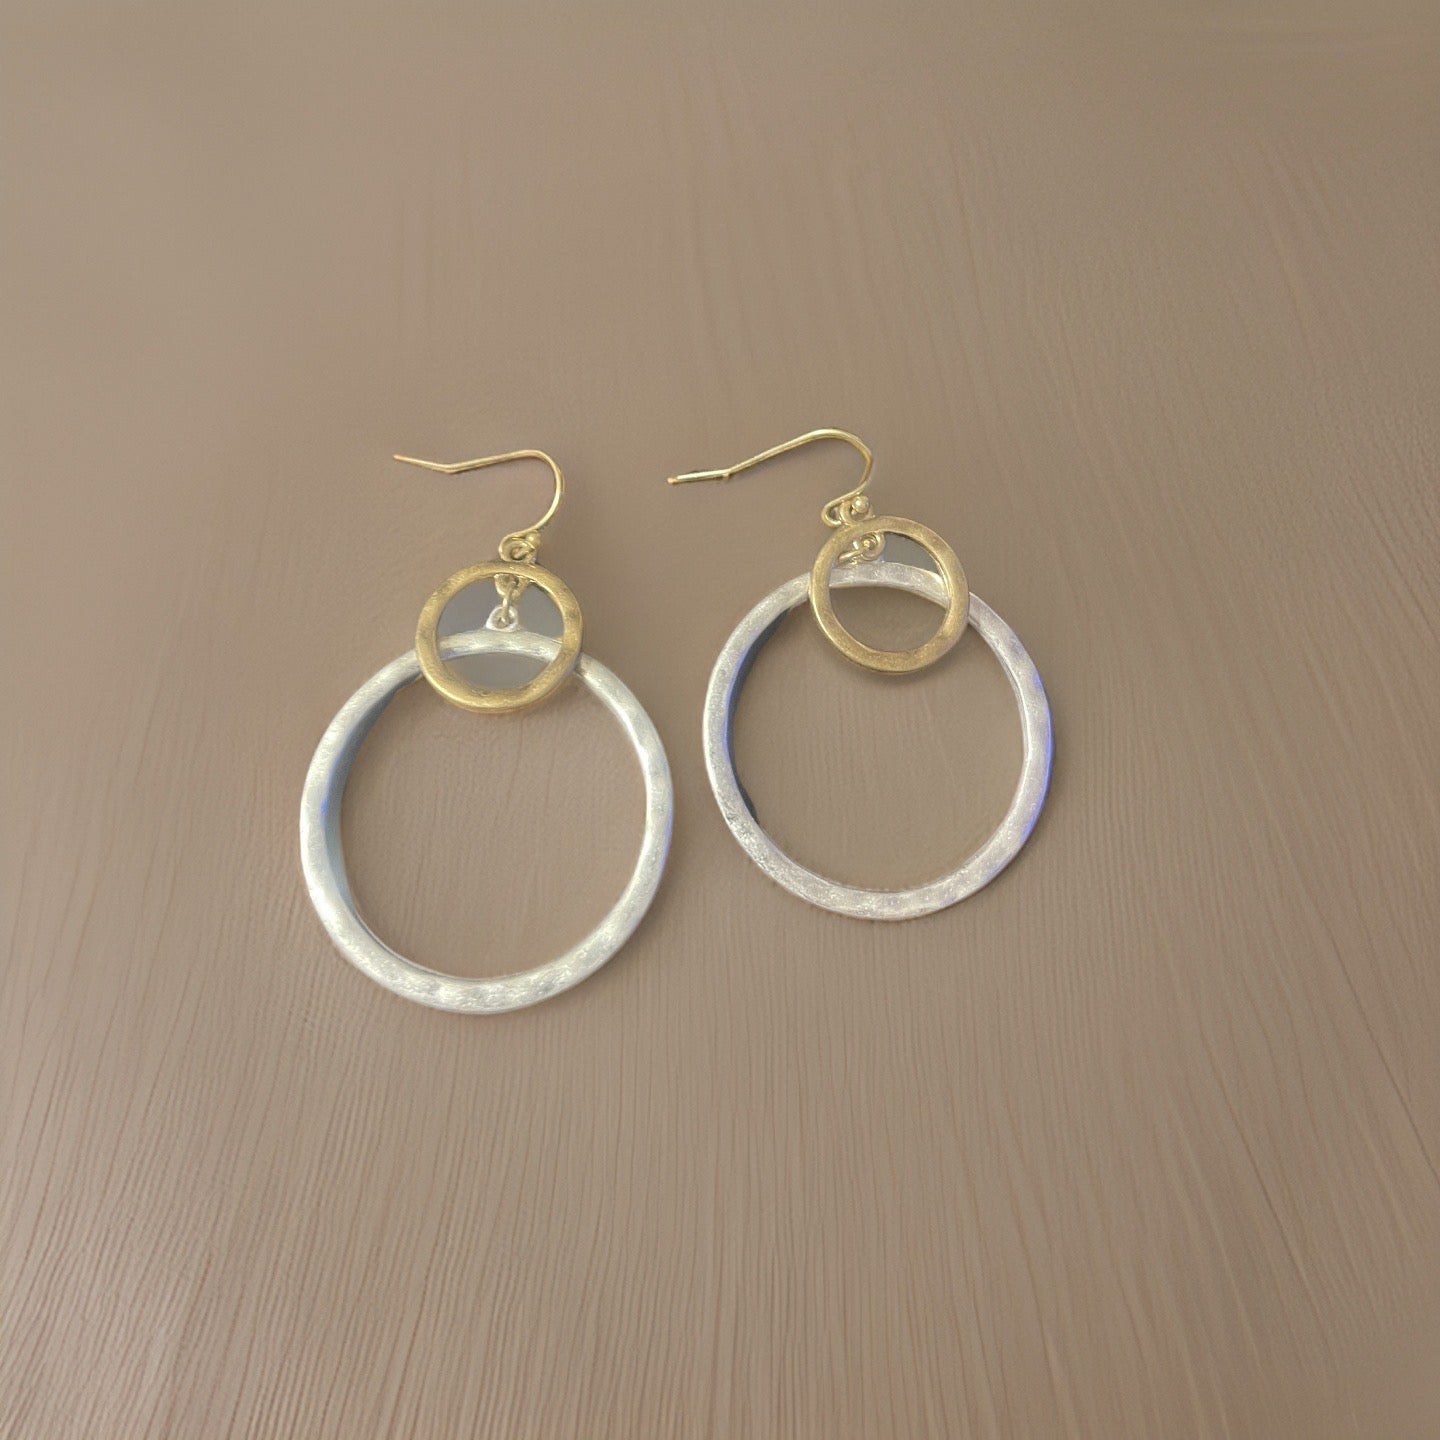 Hammered Double Loop Earrings Silver and Gold - 2 styles